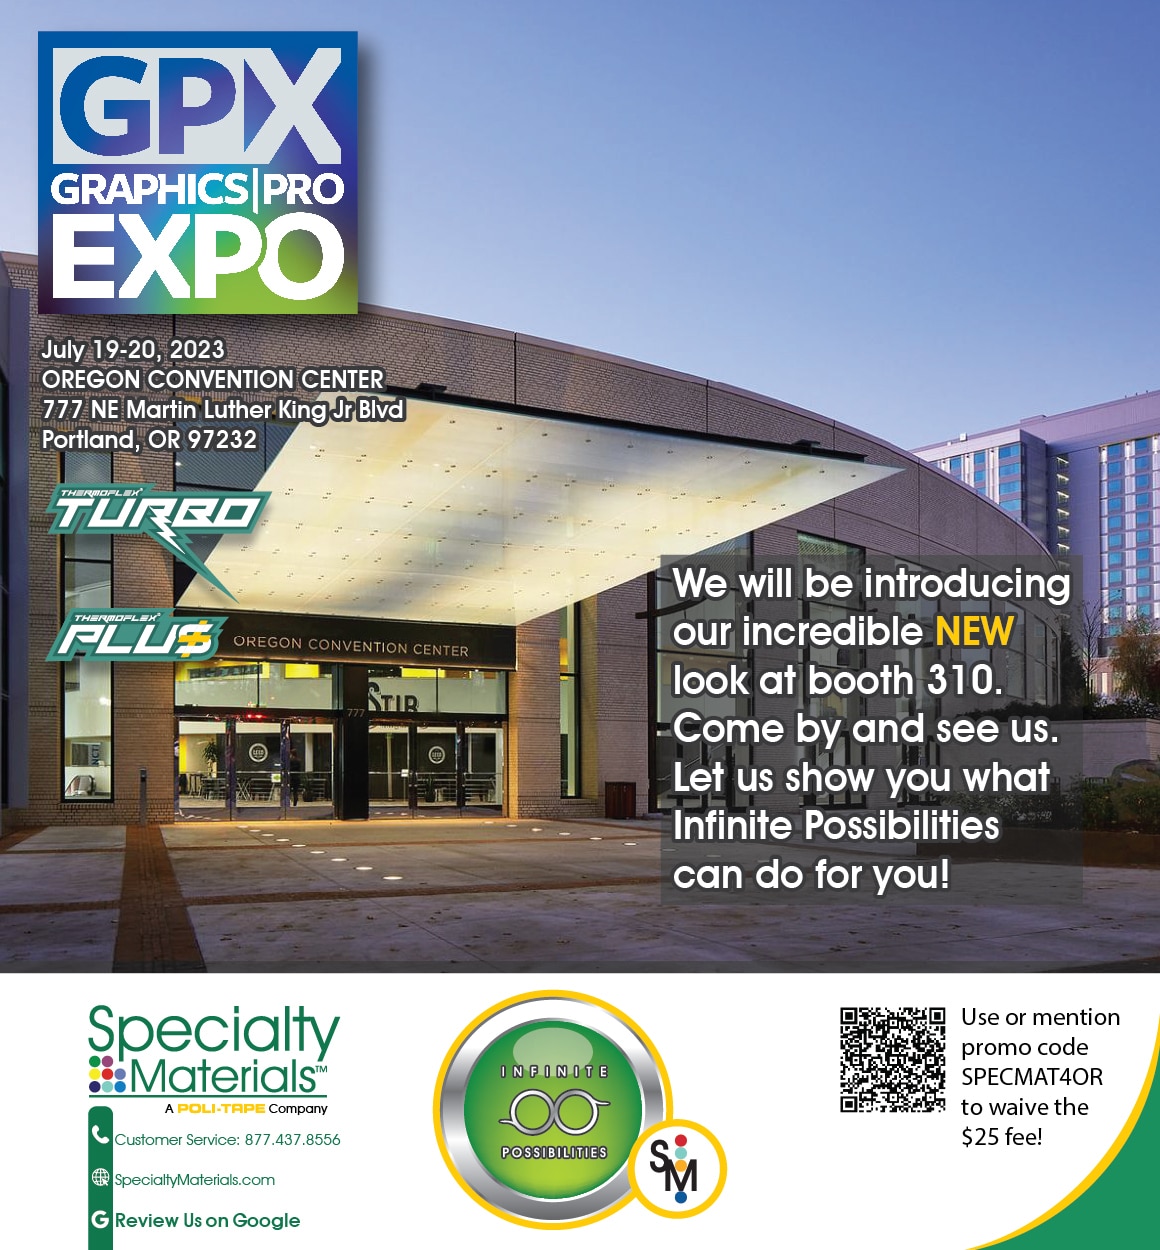 2023 GPX GRAPHICS PRO EXPO – Portland, OR